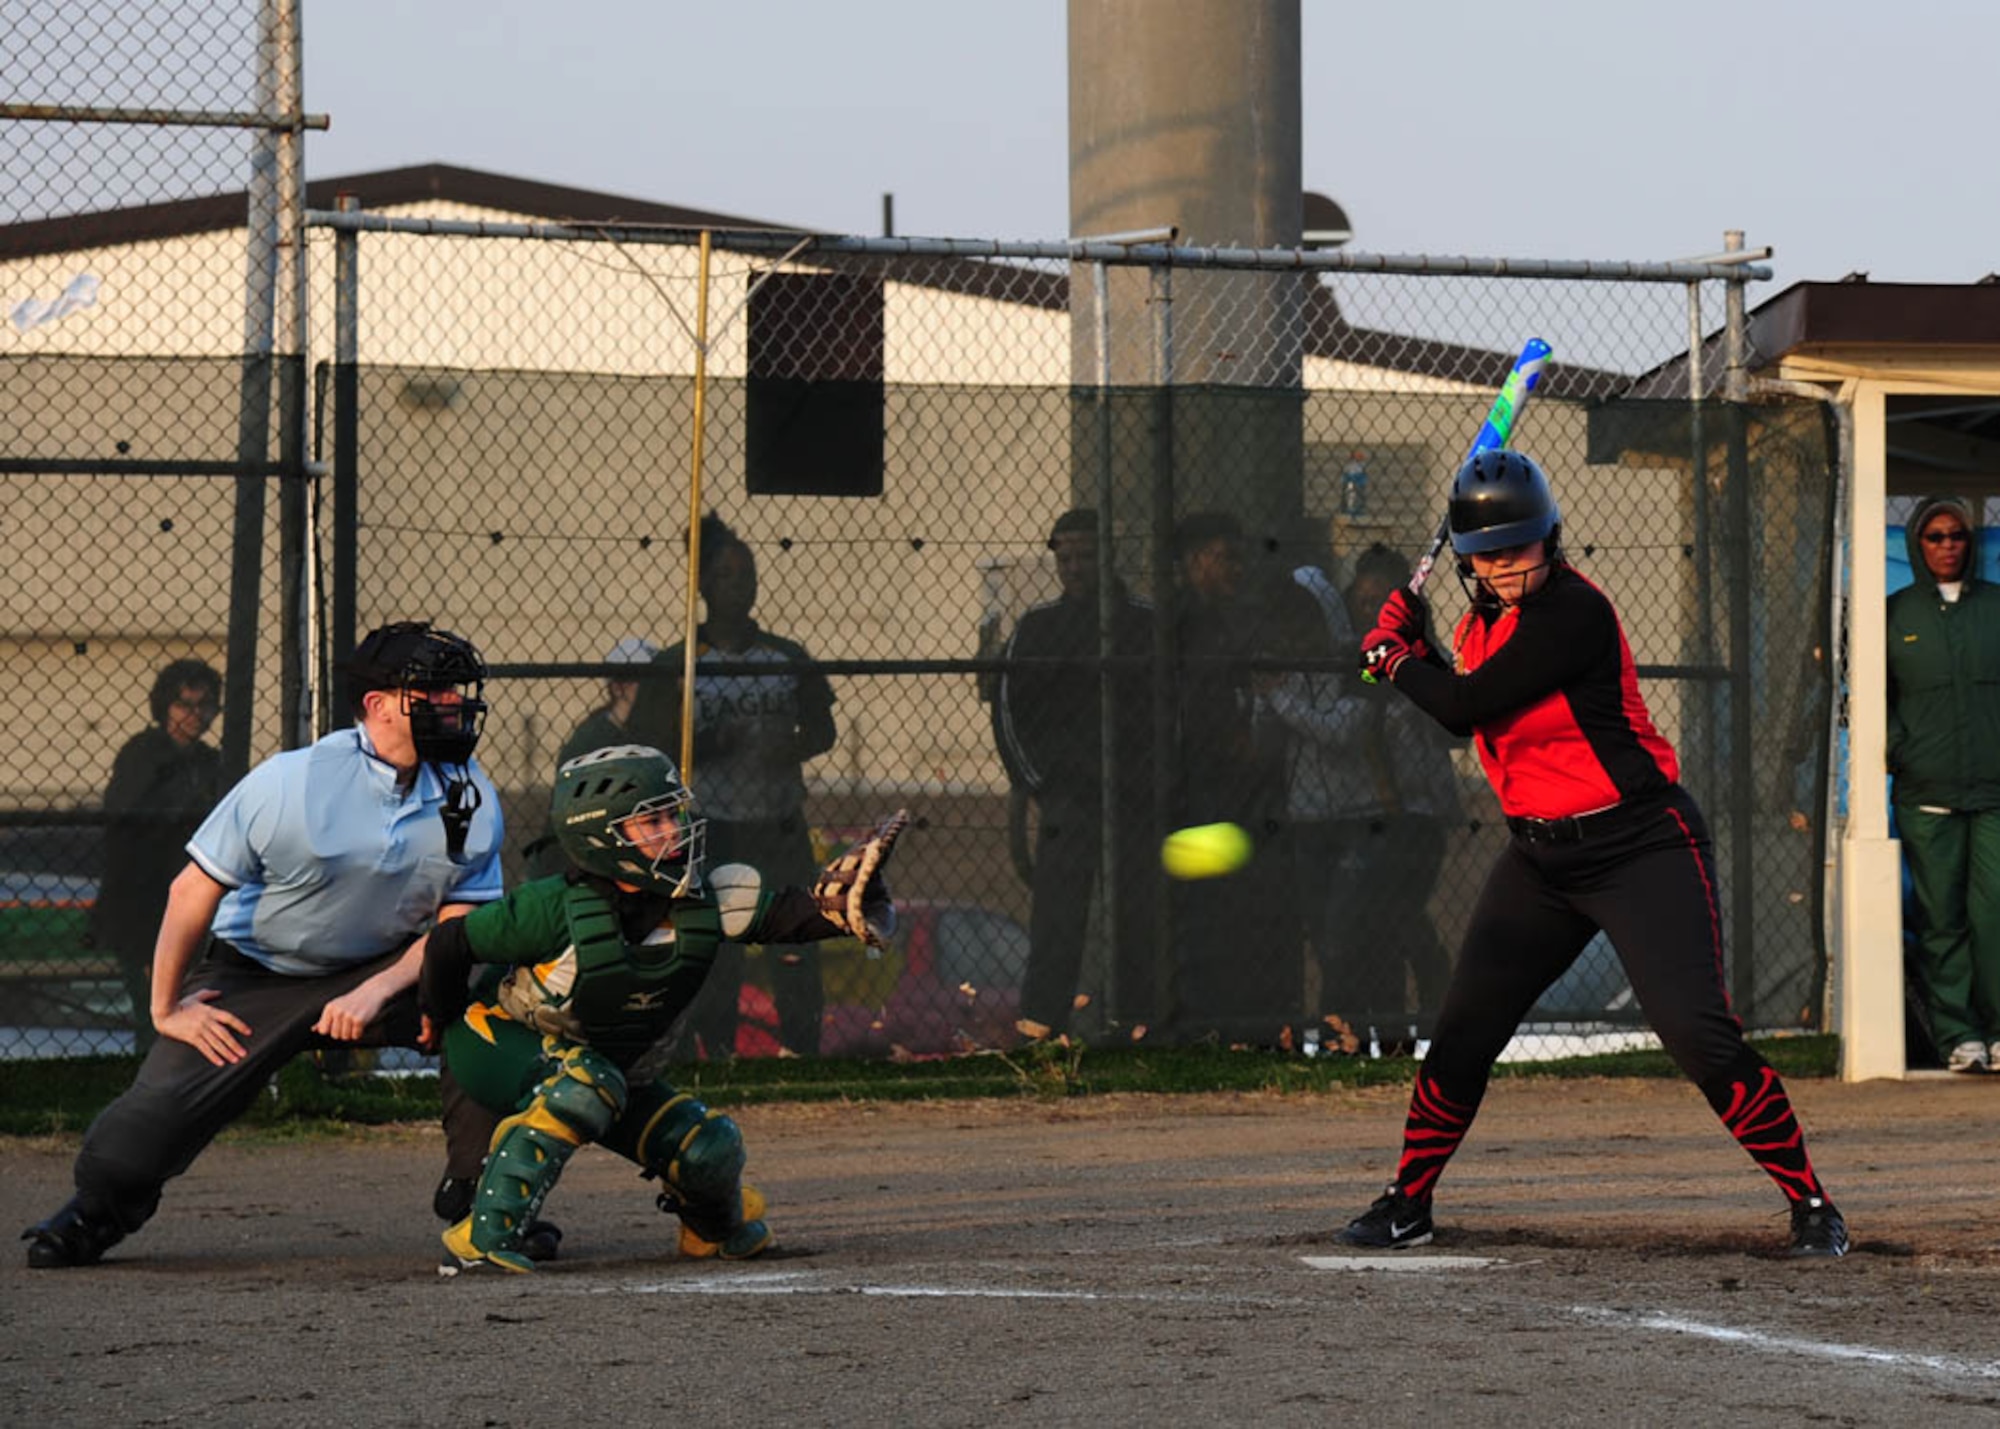 Sabrina, daughter of SMSgt Vincent Doria, 35th Maintenance Group quality insurance inspector, catches a fast pitch softball as a batter from Nile C. Kinnick High School watches it fly through the strike zone during a weekend competition on Misawa Air Base, Japan, April 14, 2017.  Sabrina is one of two team captains leading the Robert D. Edgren Lady Eagles softball team through the season. (U.S. Air Force photo by Tech. Sgt. April Quintanilla)